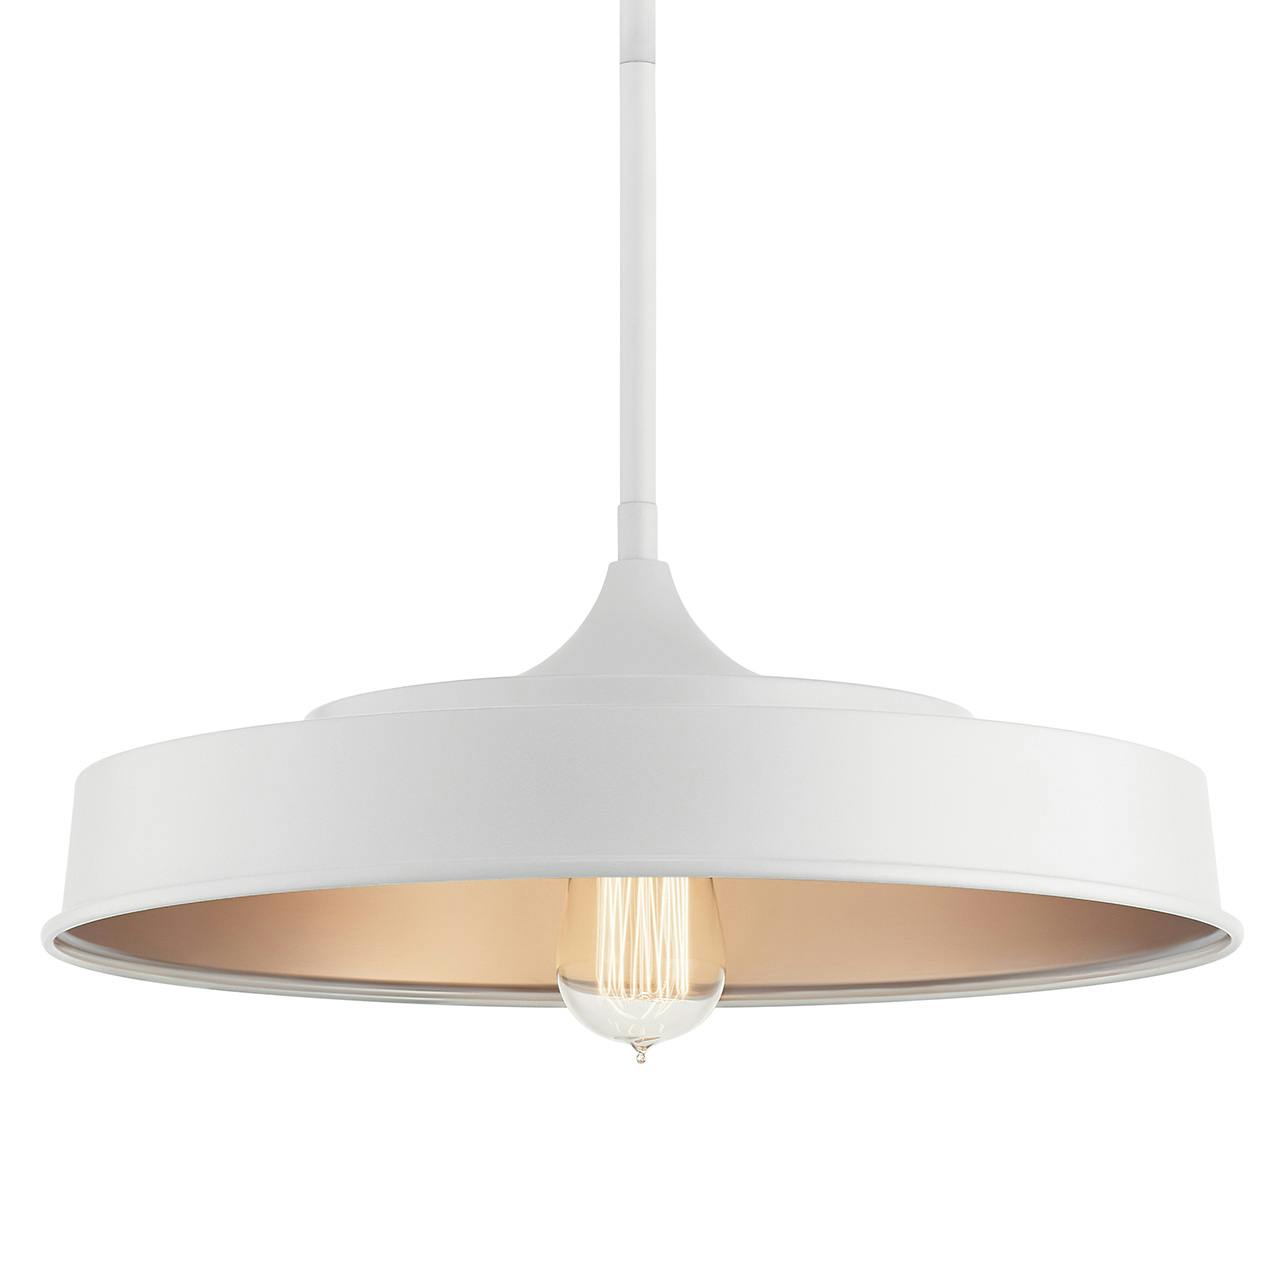 Elias 16" 1 Light Semi Flush White without the canopy on a white background